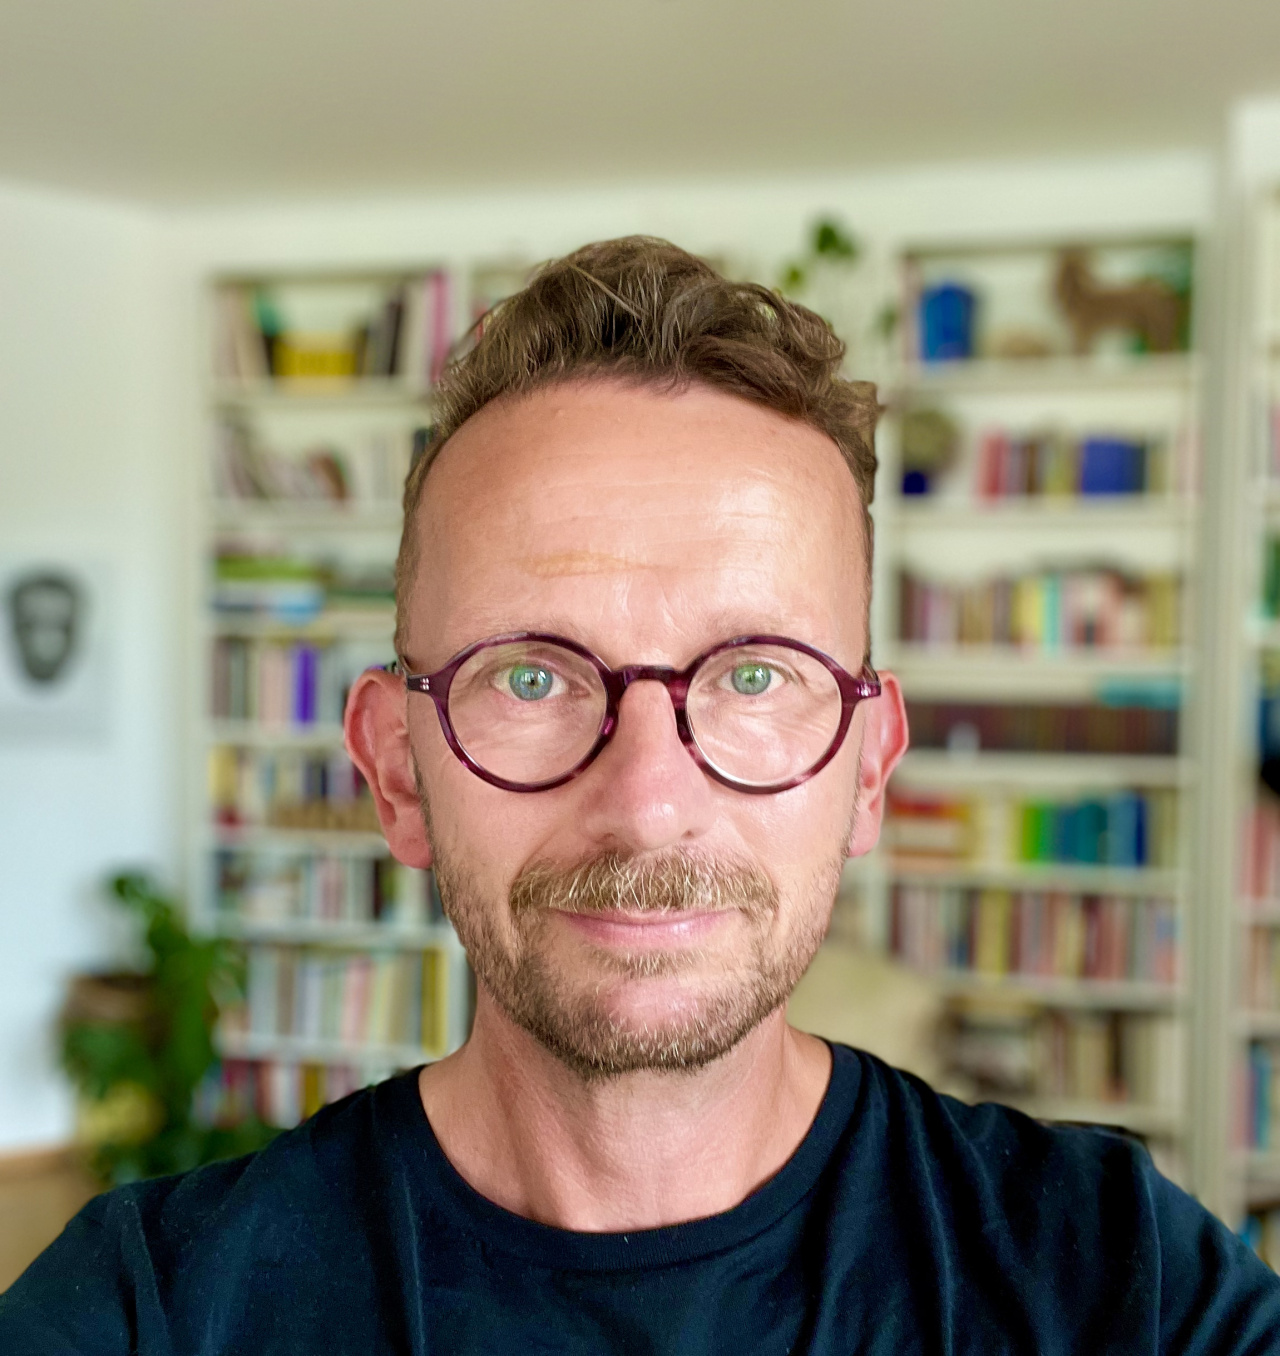 Portrait of a man with round glasses in front of a bookshelf.